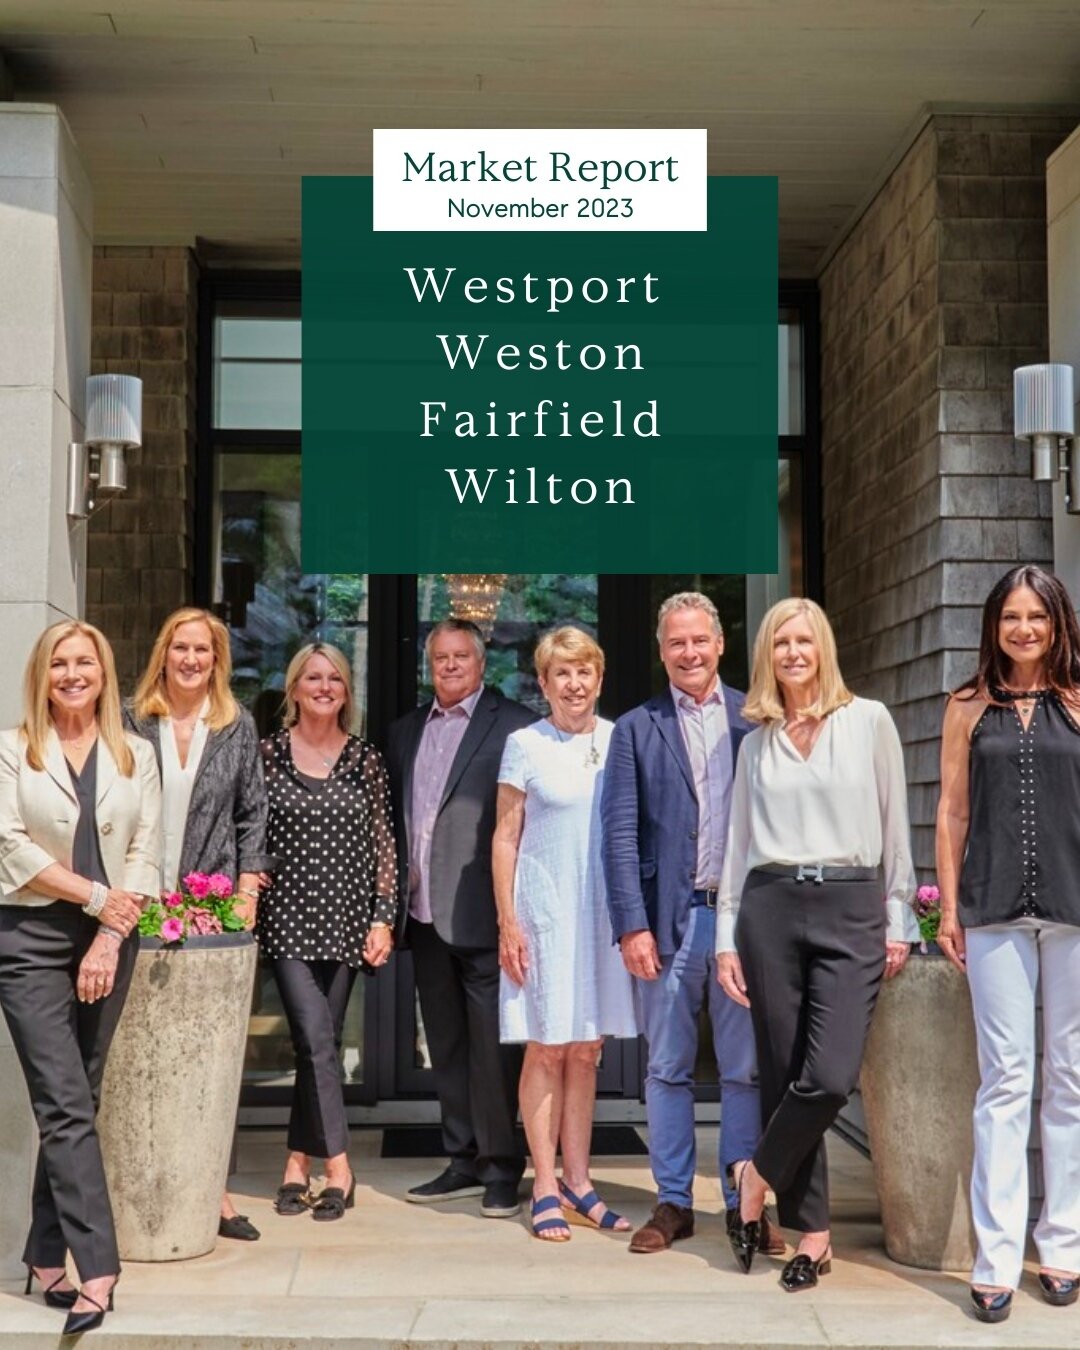 CT Market Report | November 2023⁠
⁠
With the official start of winter just around the corner, we have your monthly real estate market report. ⁠Let's take a look at how the Fairfield County market fared during those cozy November days! ⁠
⁠
Swipe for t